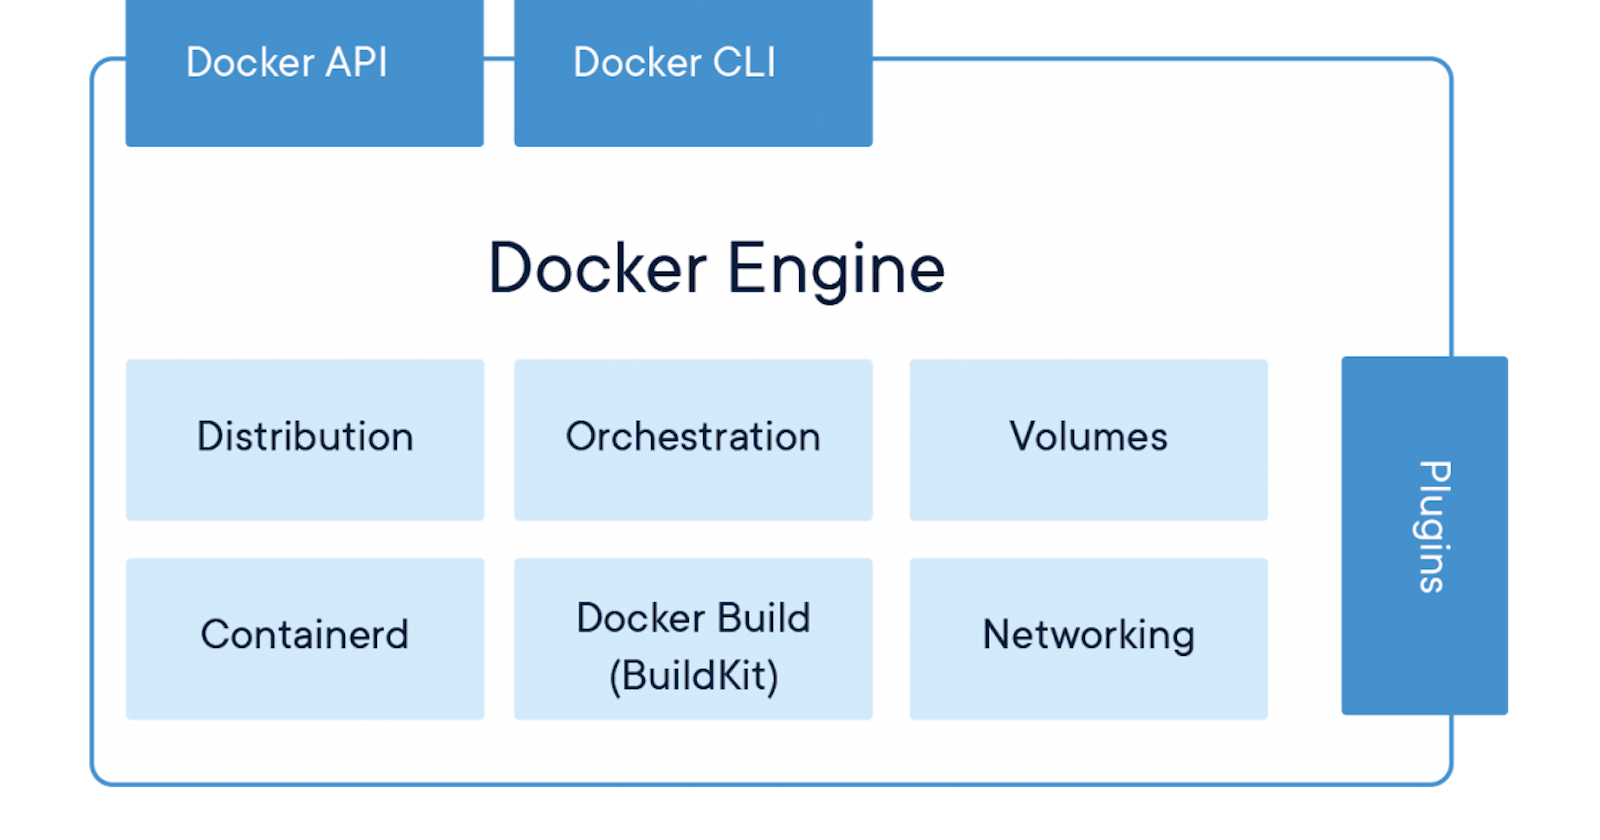 A Tale of Two Runtimes: Understanding Docker's Low-Level and High-Level Runtimes